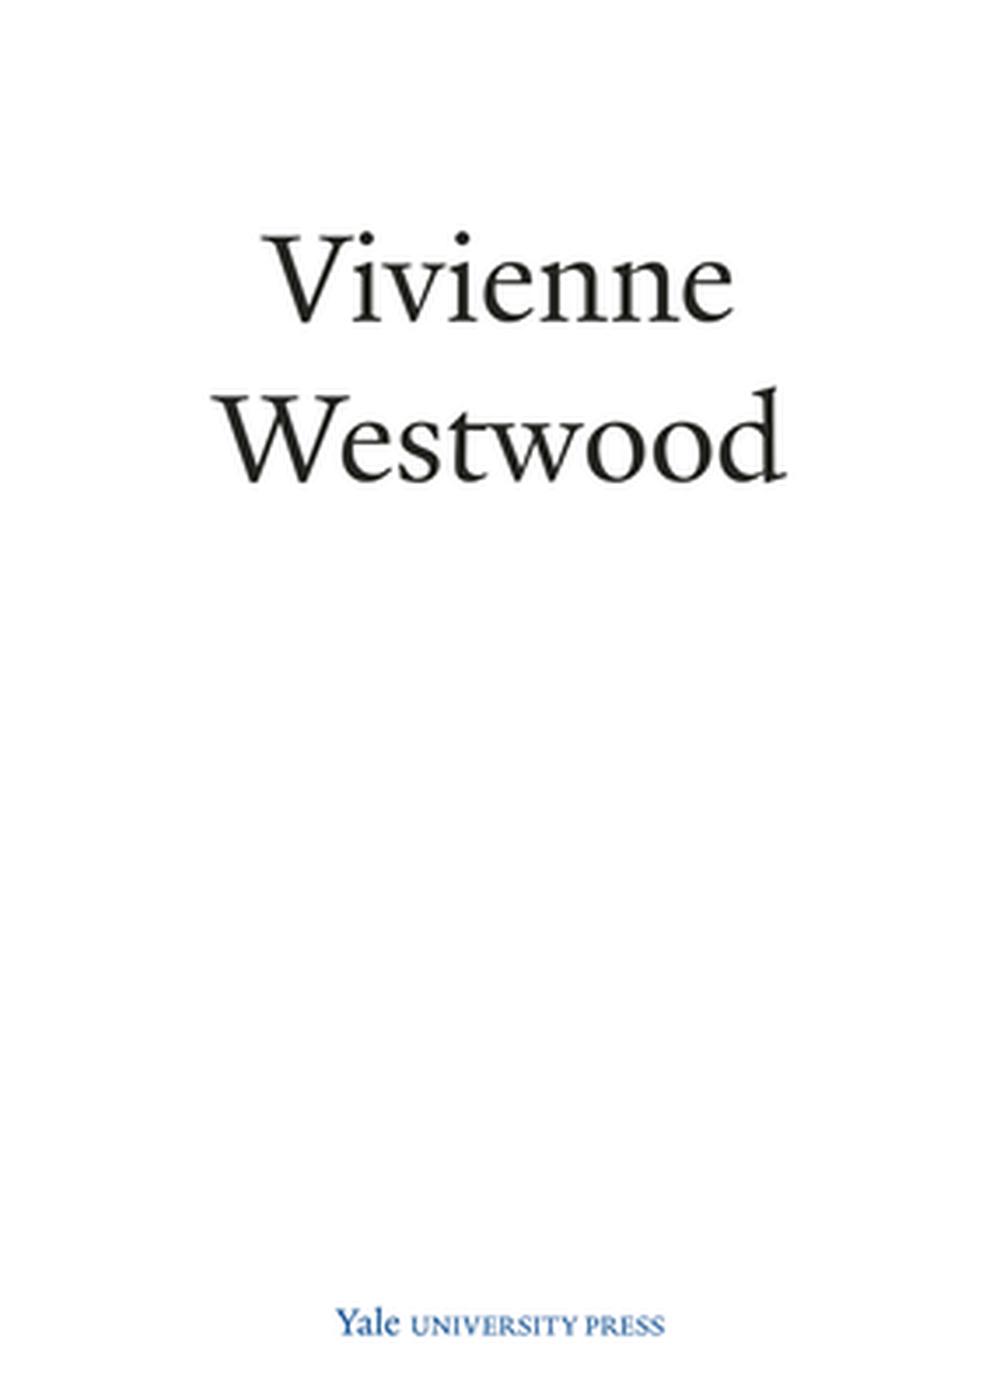 Vivienne Westwood: The Complete Collections (Catwalk) (Hardcover)